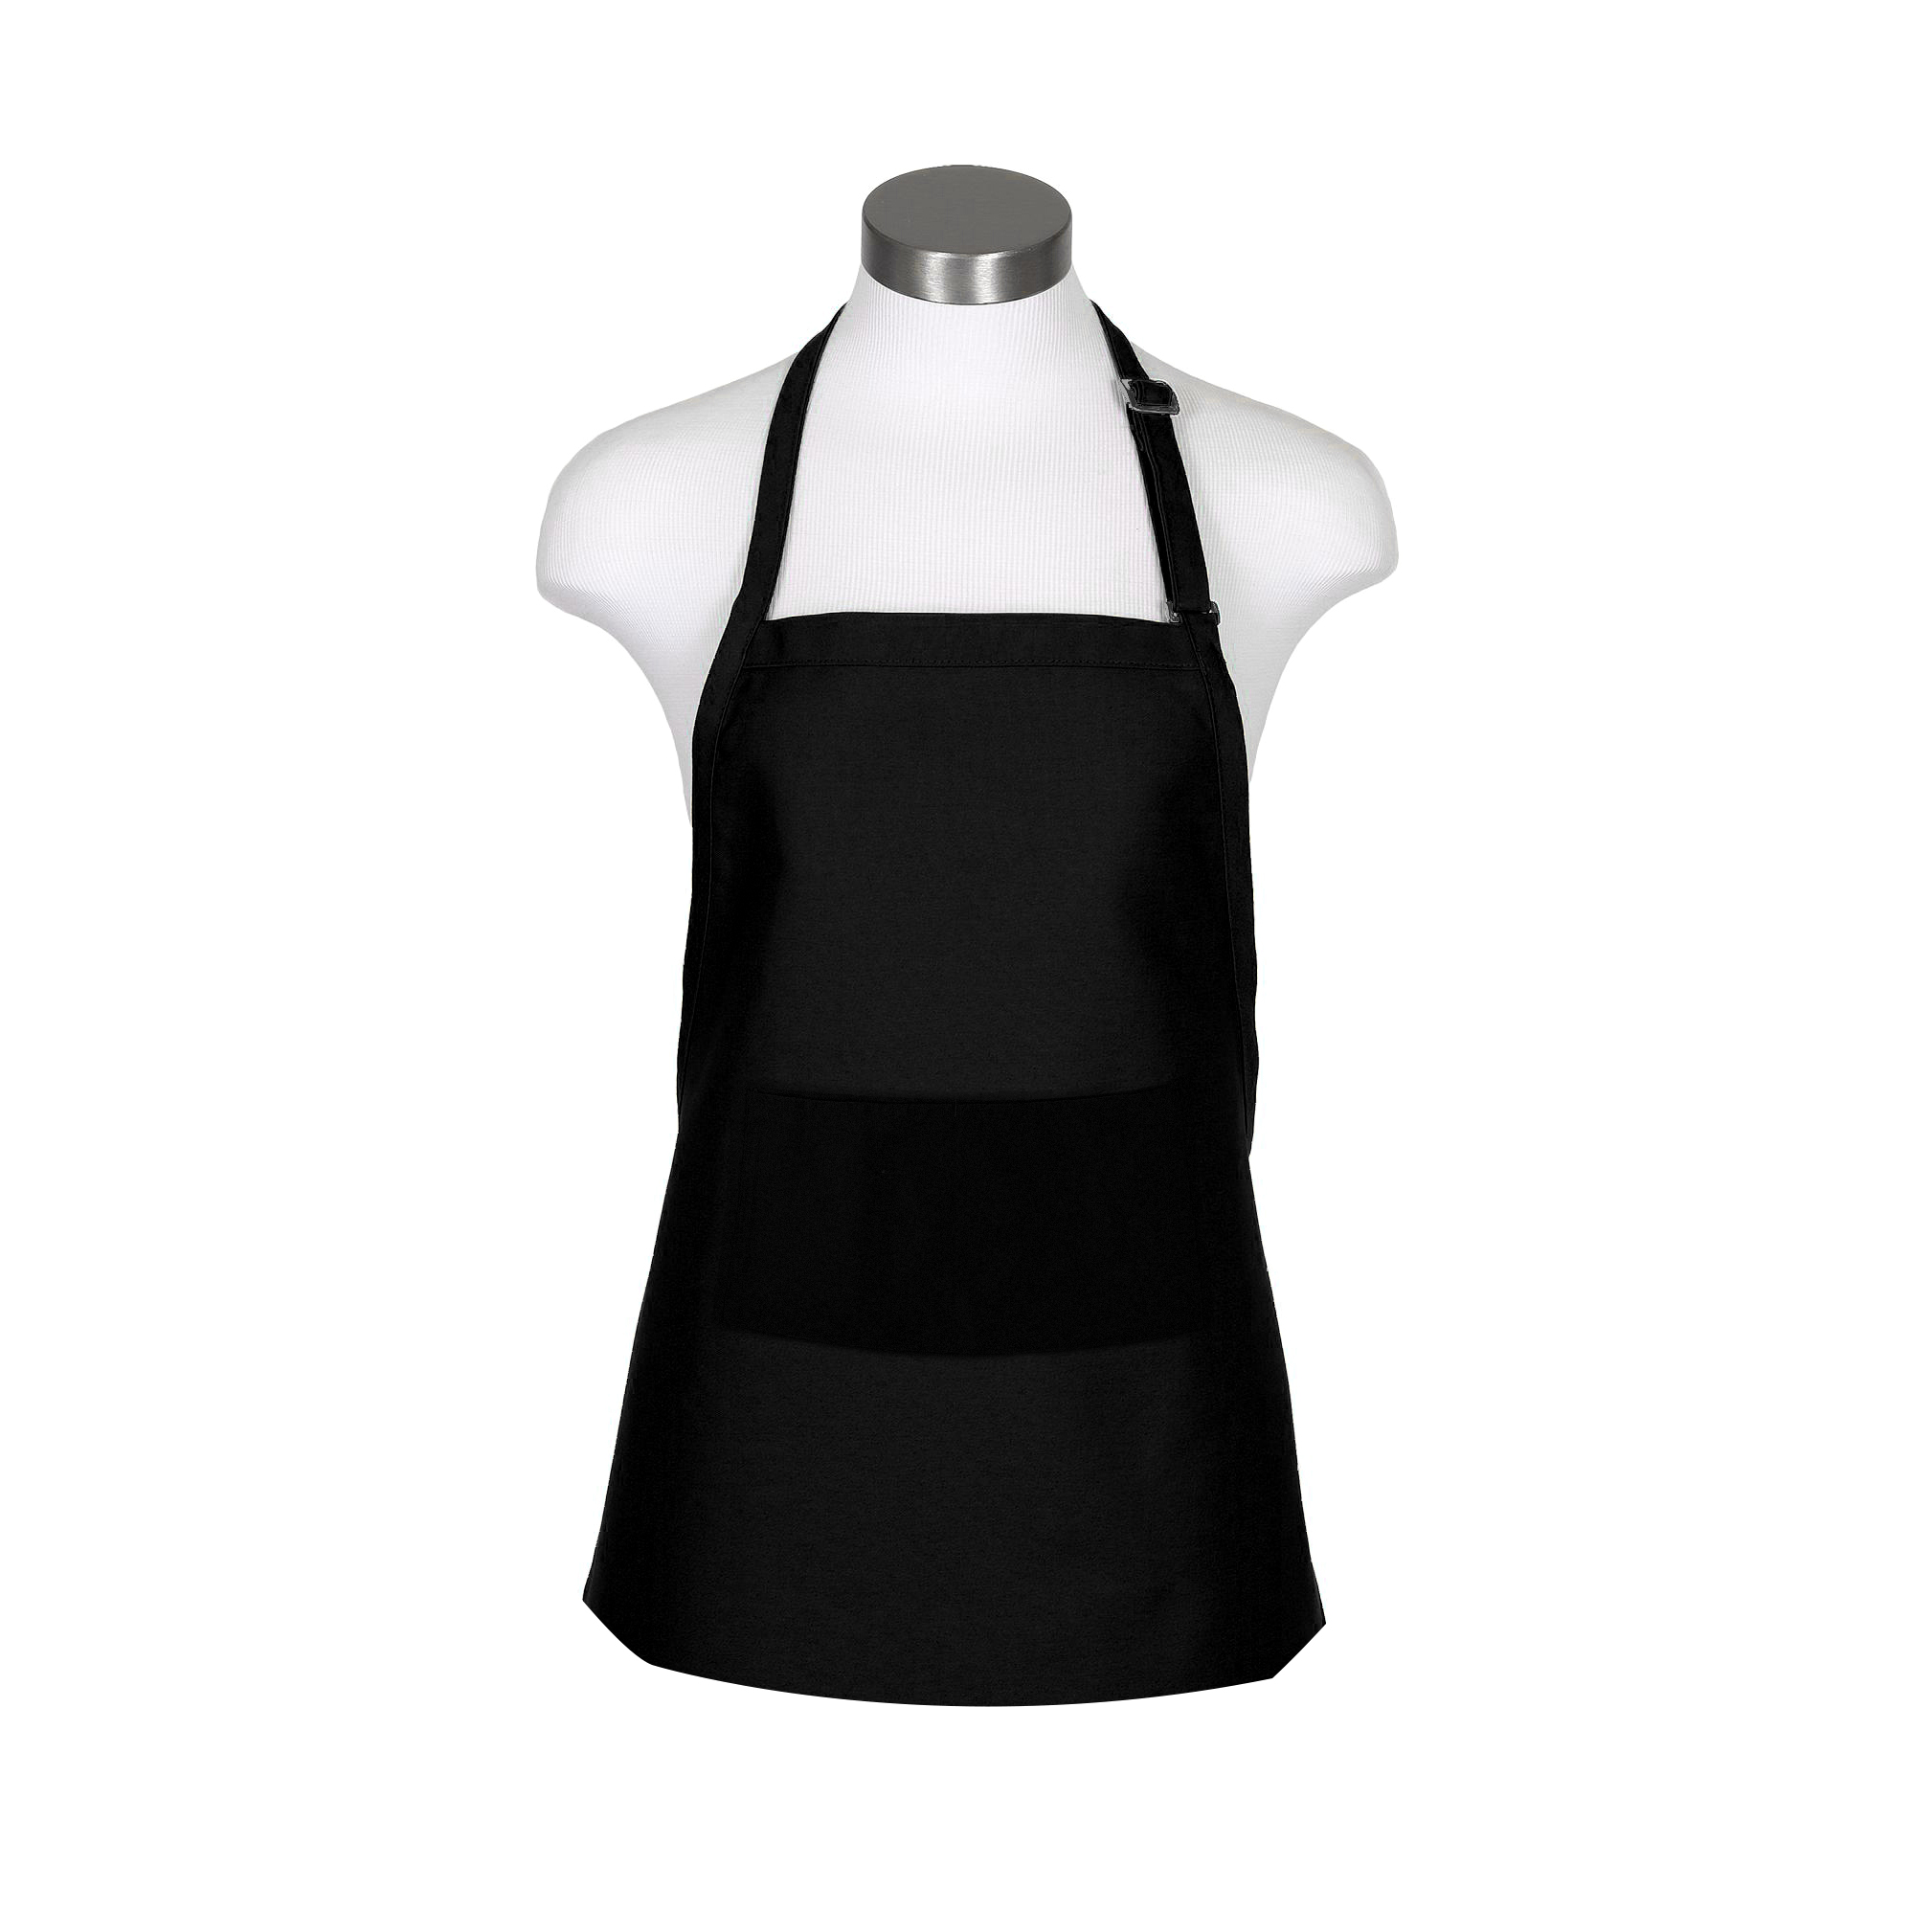 60 Pack Adjustable Full Size Bib Apron with 2 Pockets Cooking  Aprons for Chef, Servers, Bar Tenders,  Barbers, Gardener, Craftsmen, Decorators, Work Apron Uniform %100 Cotton one size - image 2 of 3